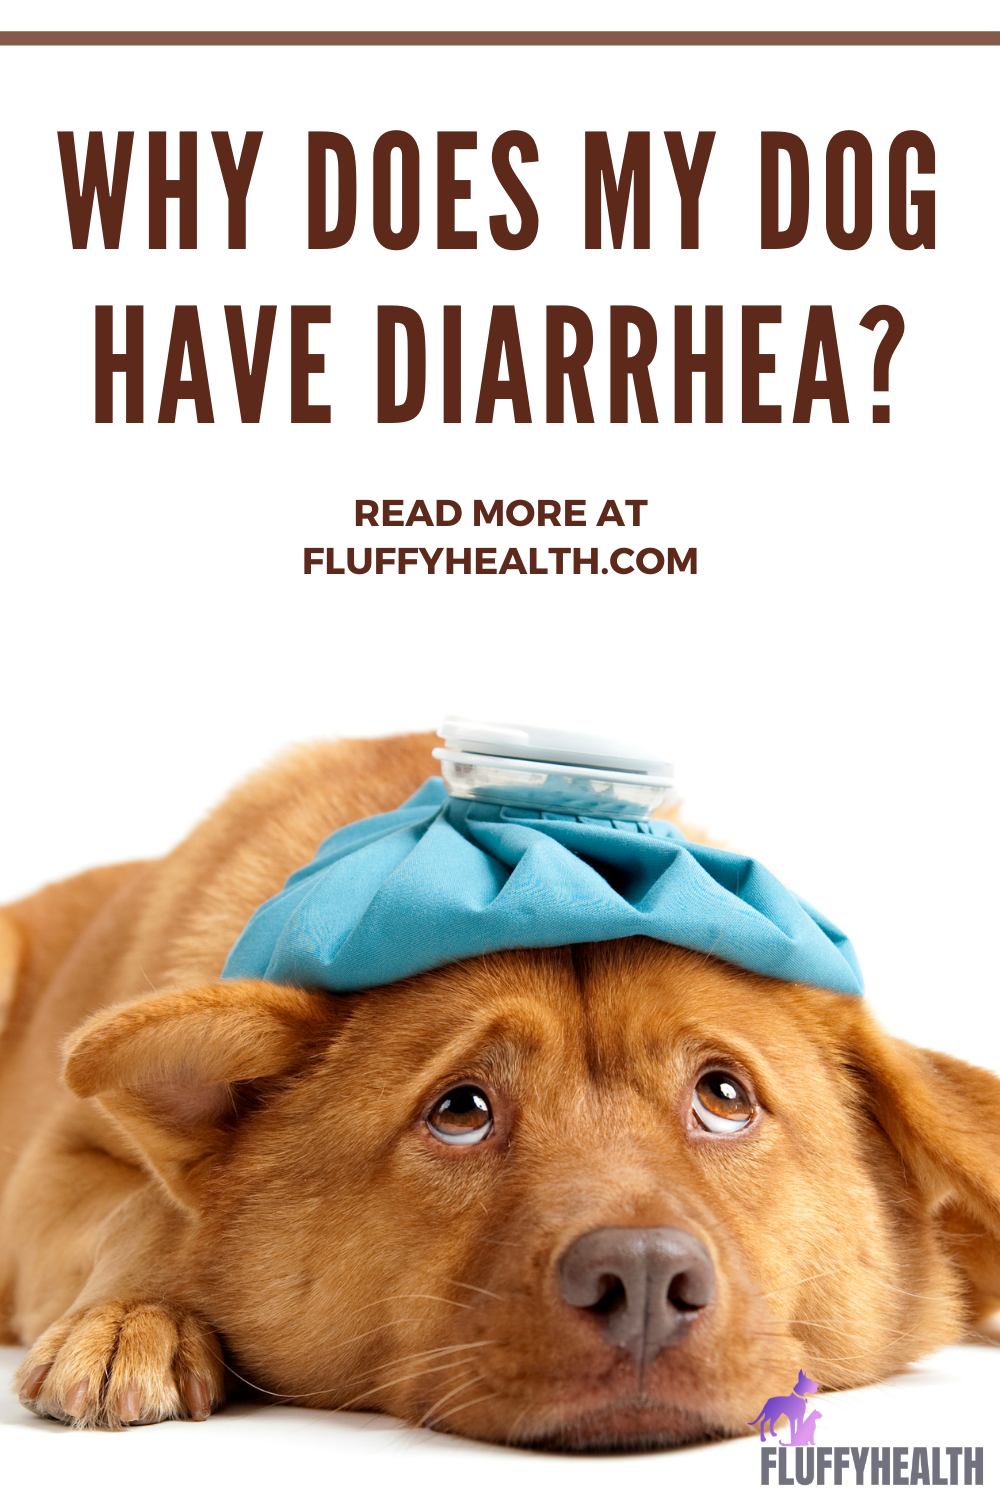 Why Does My Dog Have Diarrhea? 9 Underlying Diseases Behind Canine’s